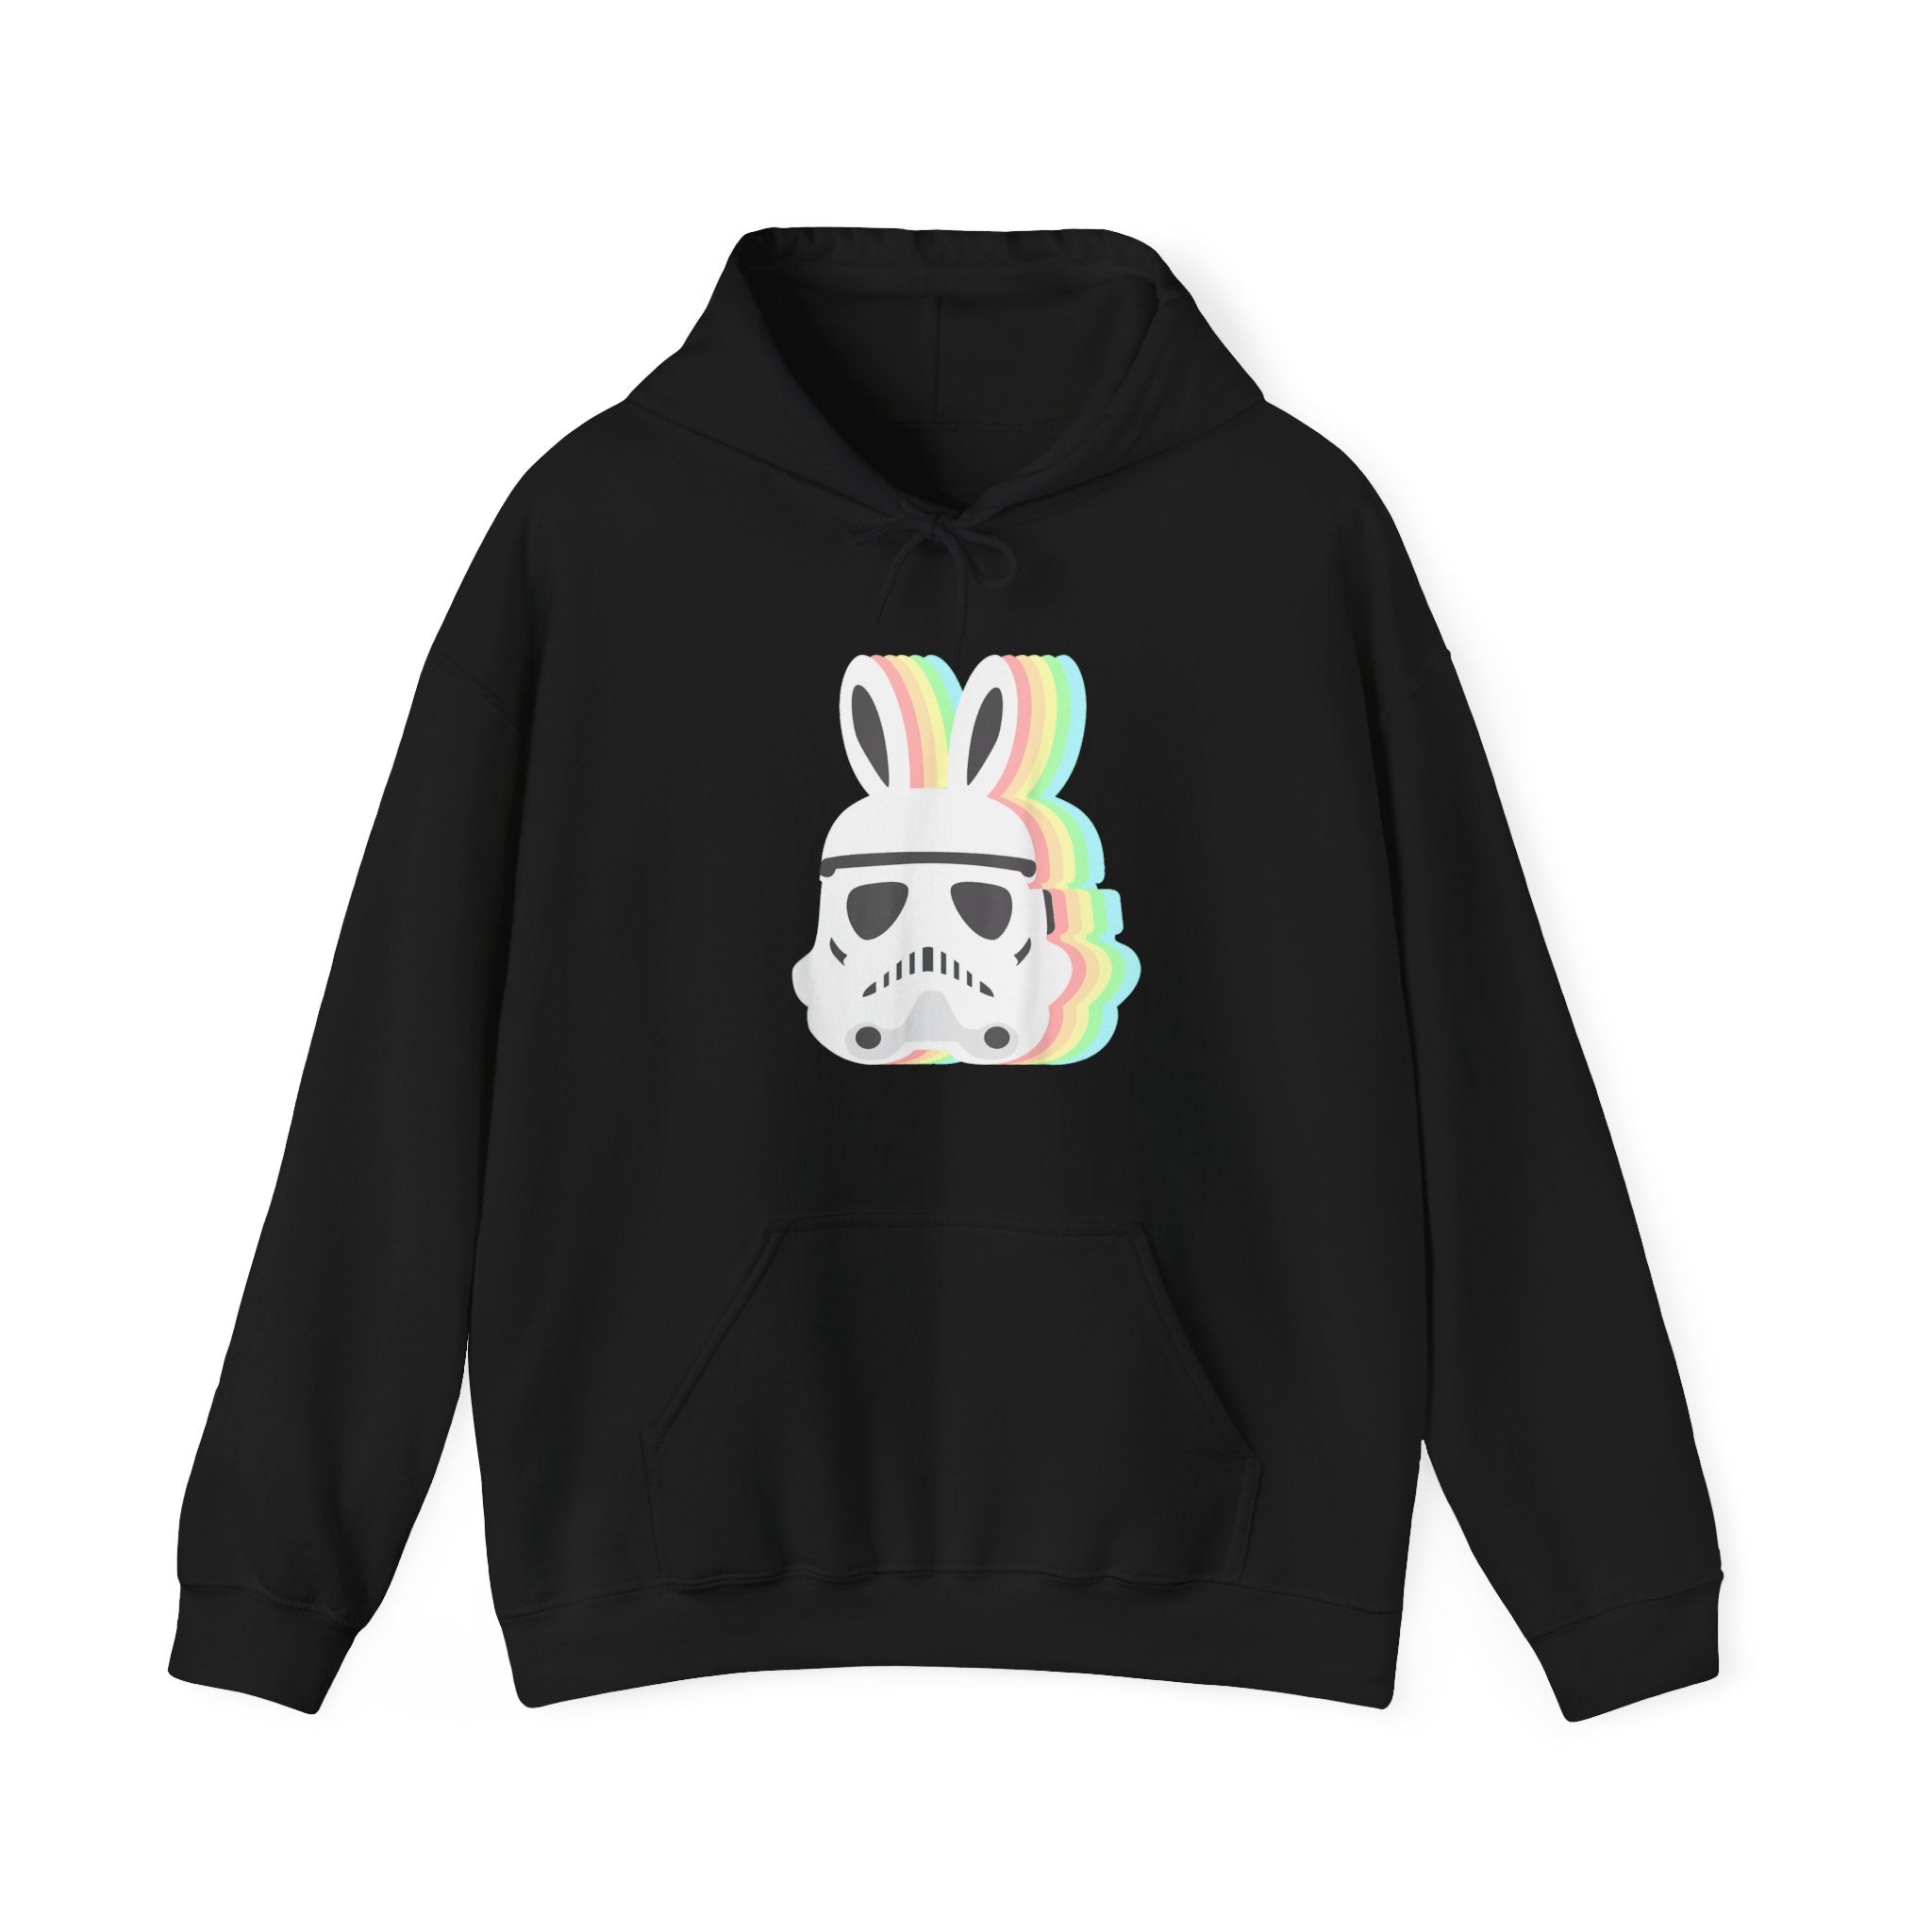 Star Wars Easter Stormtrooper - Hooded Sweatshirt featuring a design of an Easter Stormtrooper helmet with rainbow-colored bunny ears.